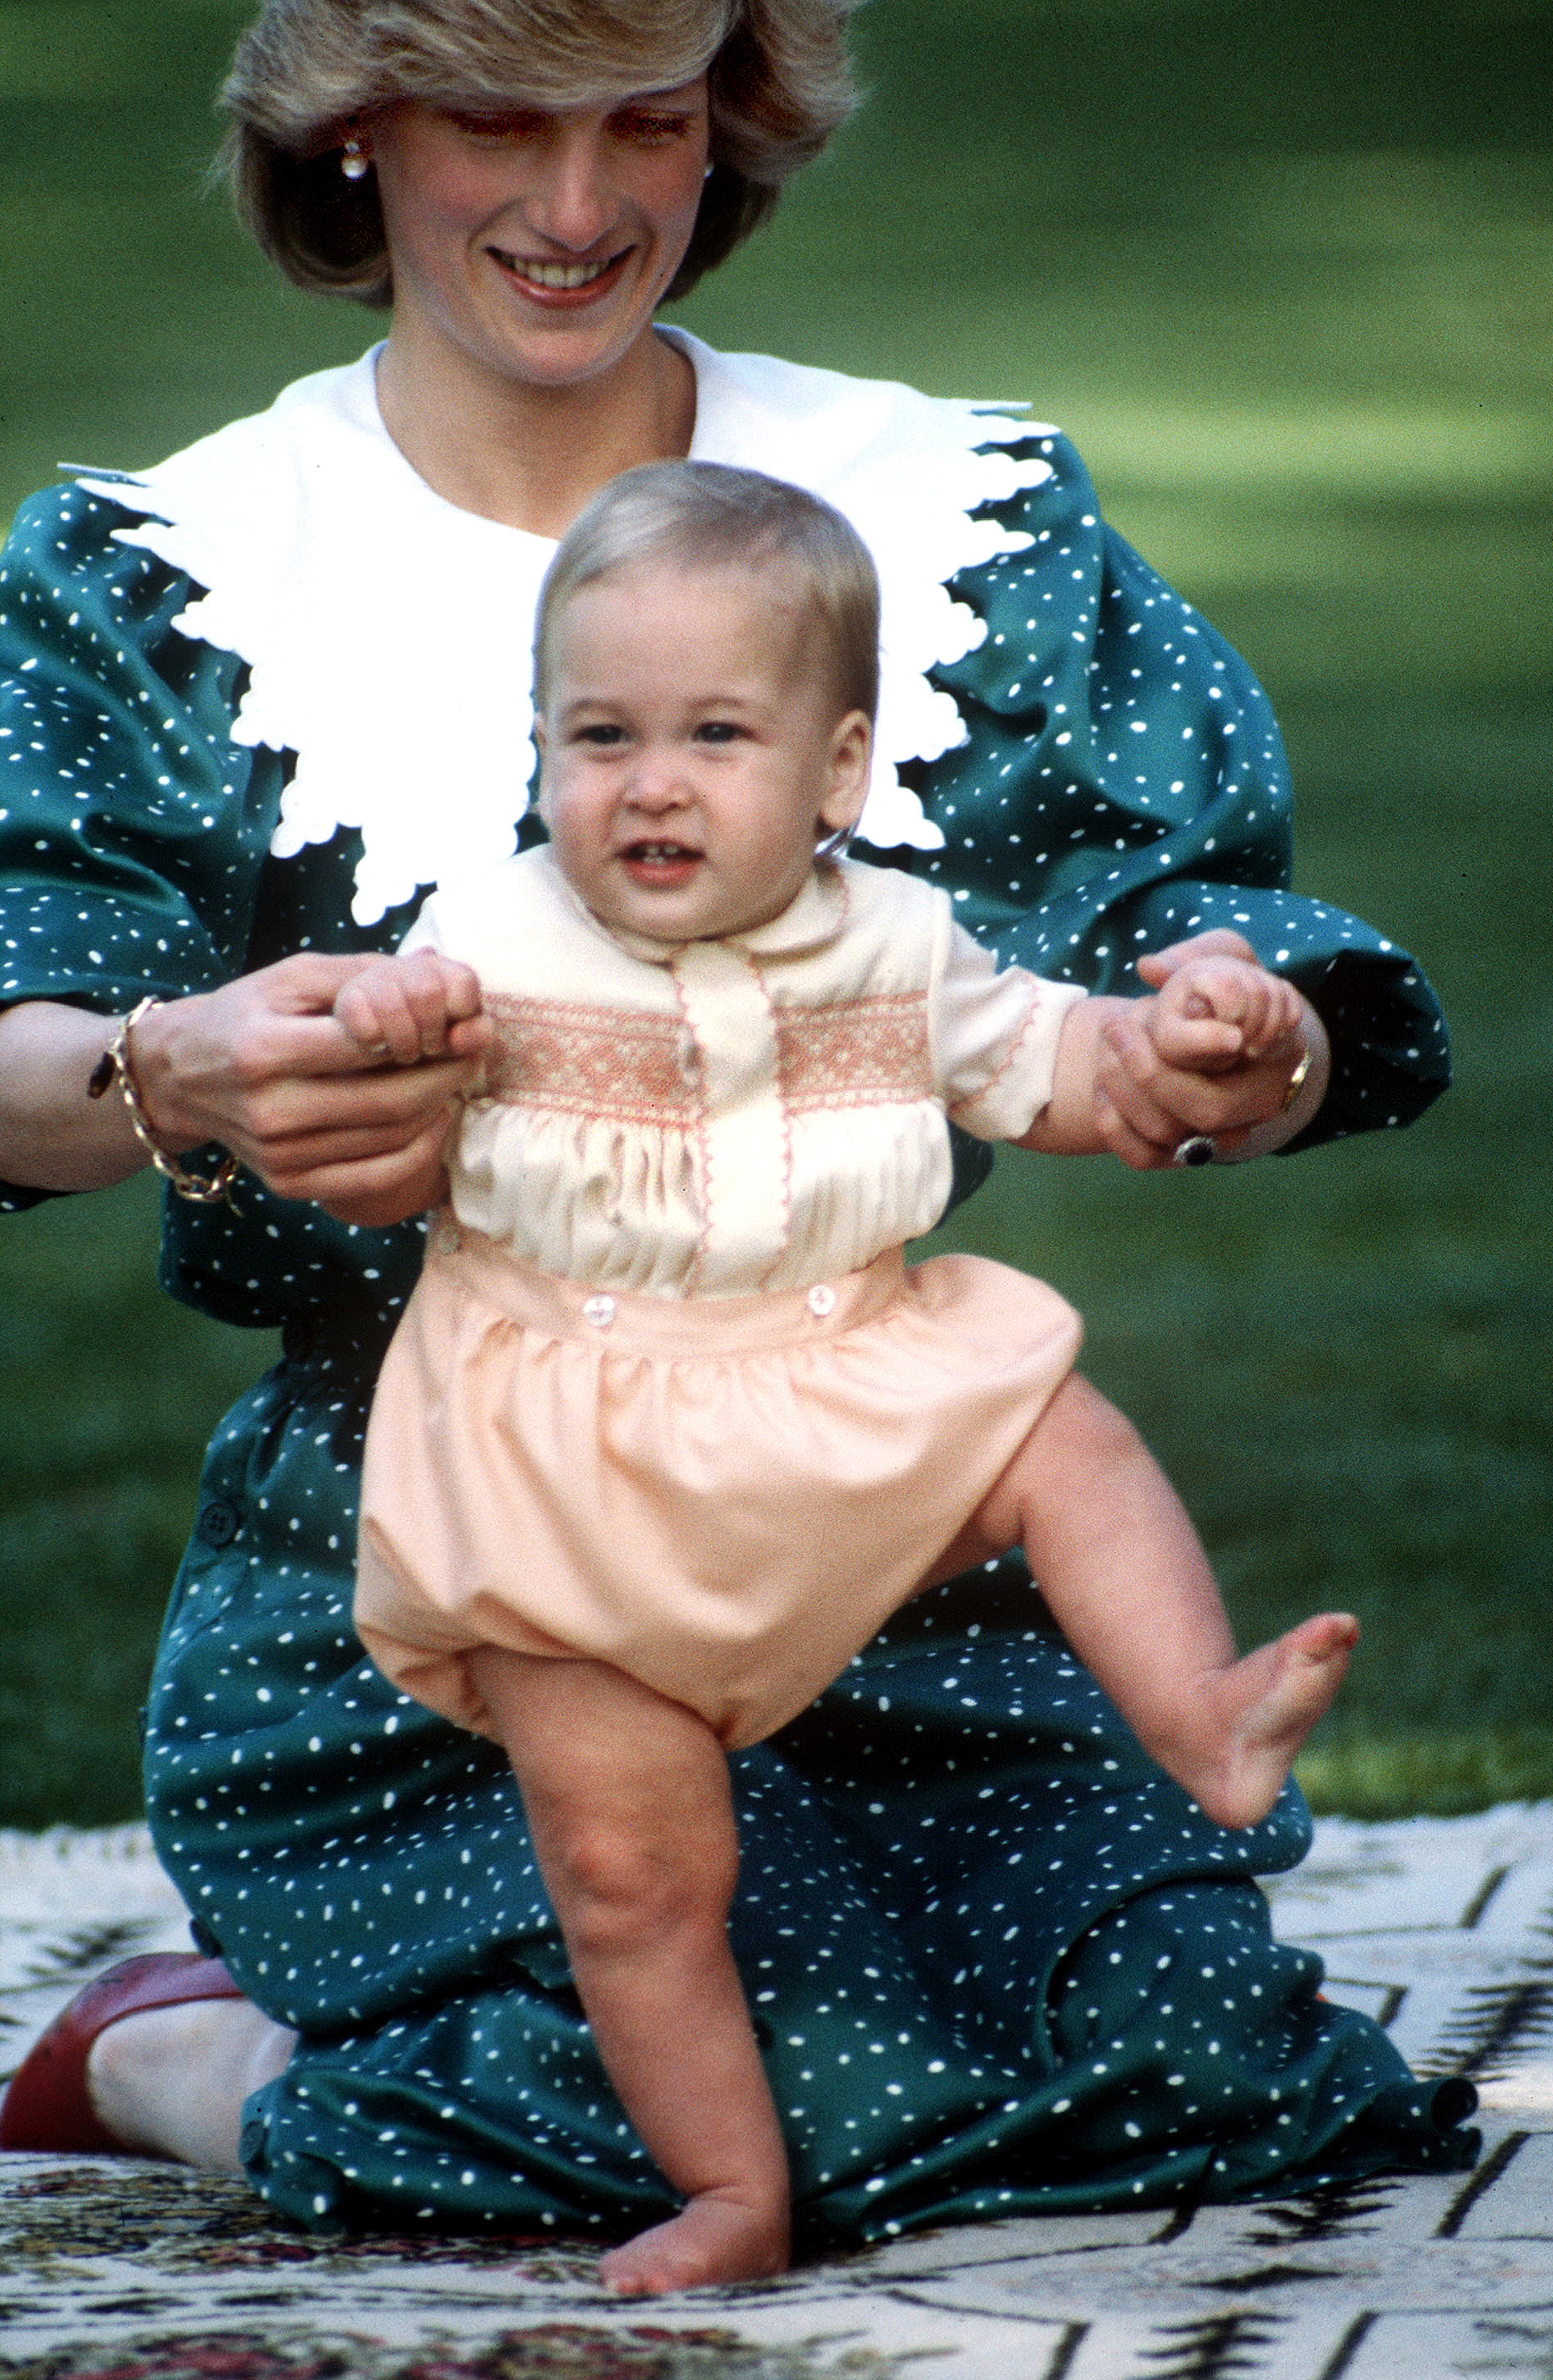 Princess Diana pictured in the grounds of Government House in Auckland, New Zealand a young, and agile, Prince William on April 23, 1983. (Princess Diana Archive—Getty Images)